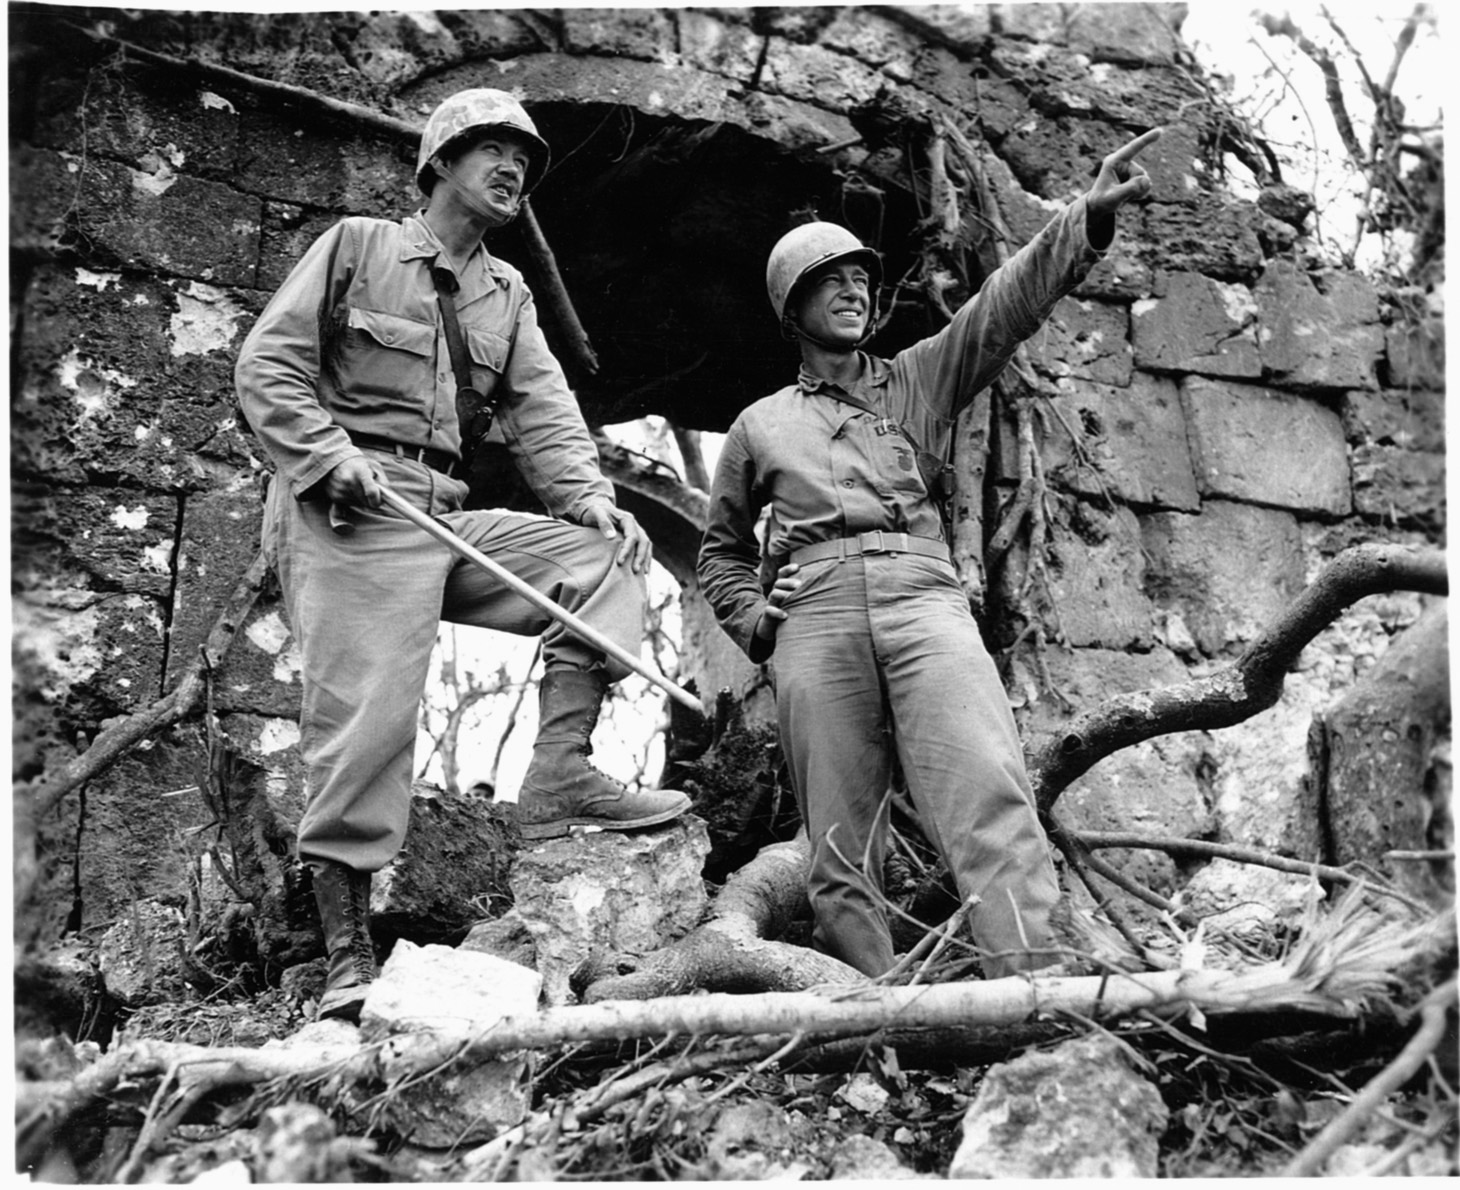 Colonel Harold Roberts of the 22nd Marines and Lt. Col. Claire W. Shisler of 3rd Battalion, 22nd Marines, confer on Okinawa.